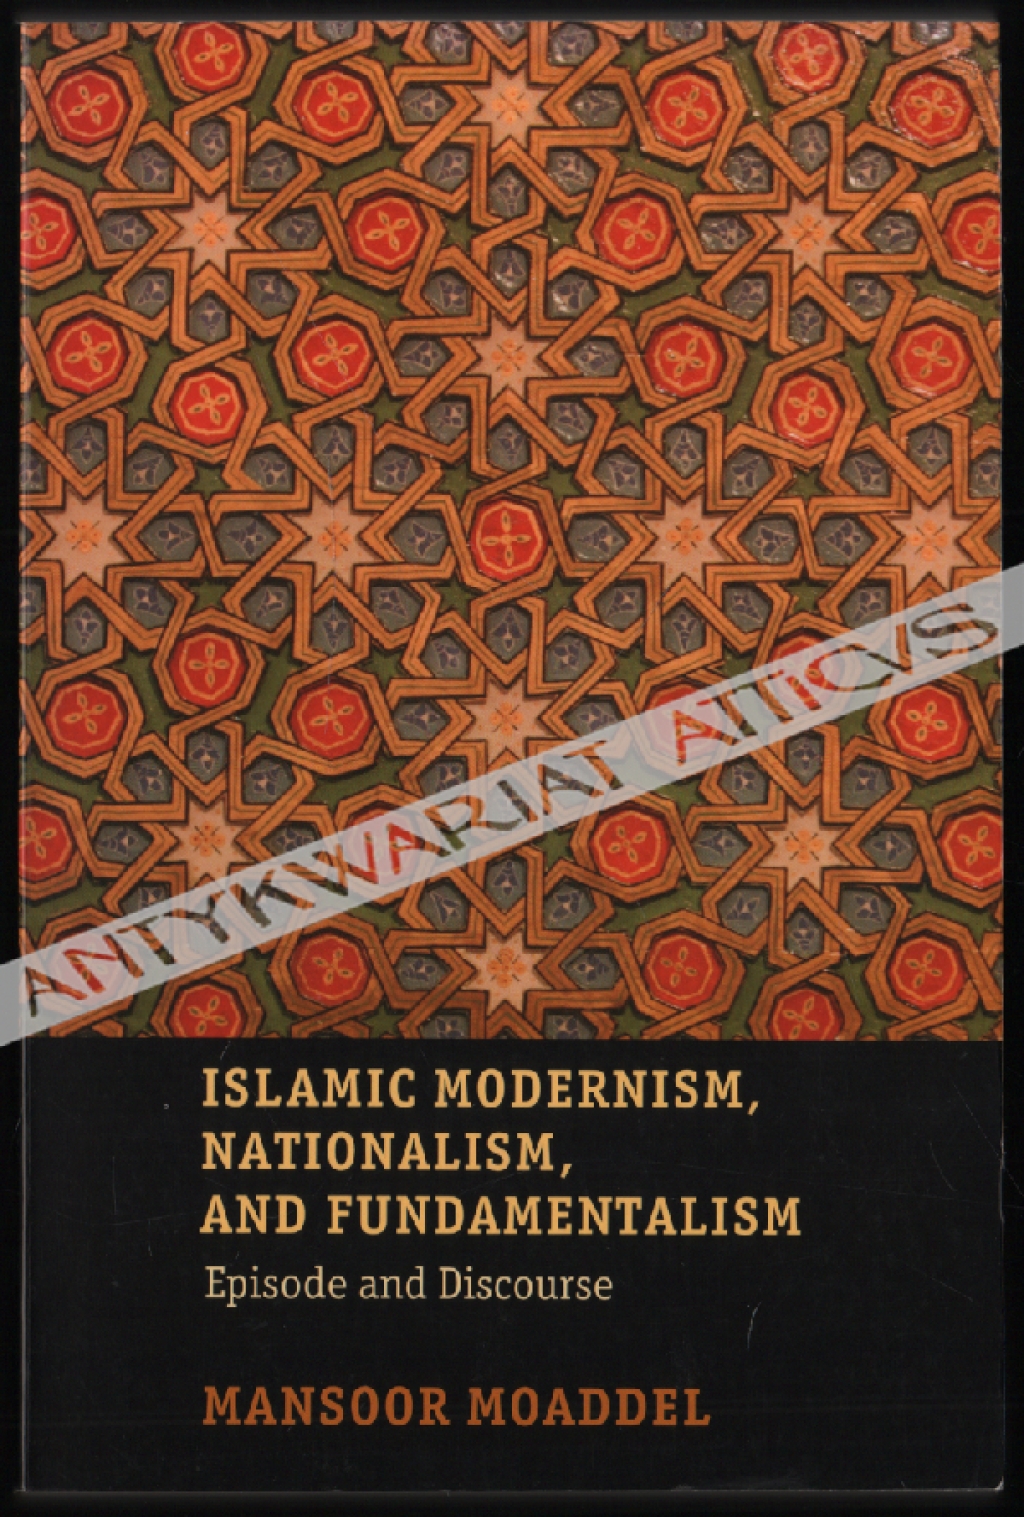 Islamic Modernism, Nationalism, and Fundamentalism. Episode and Discourse